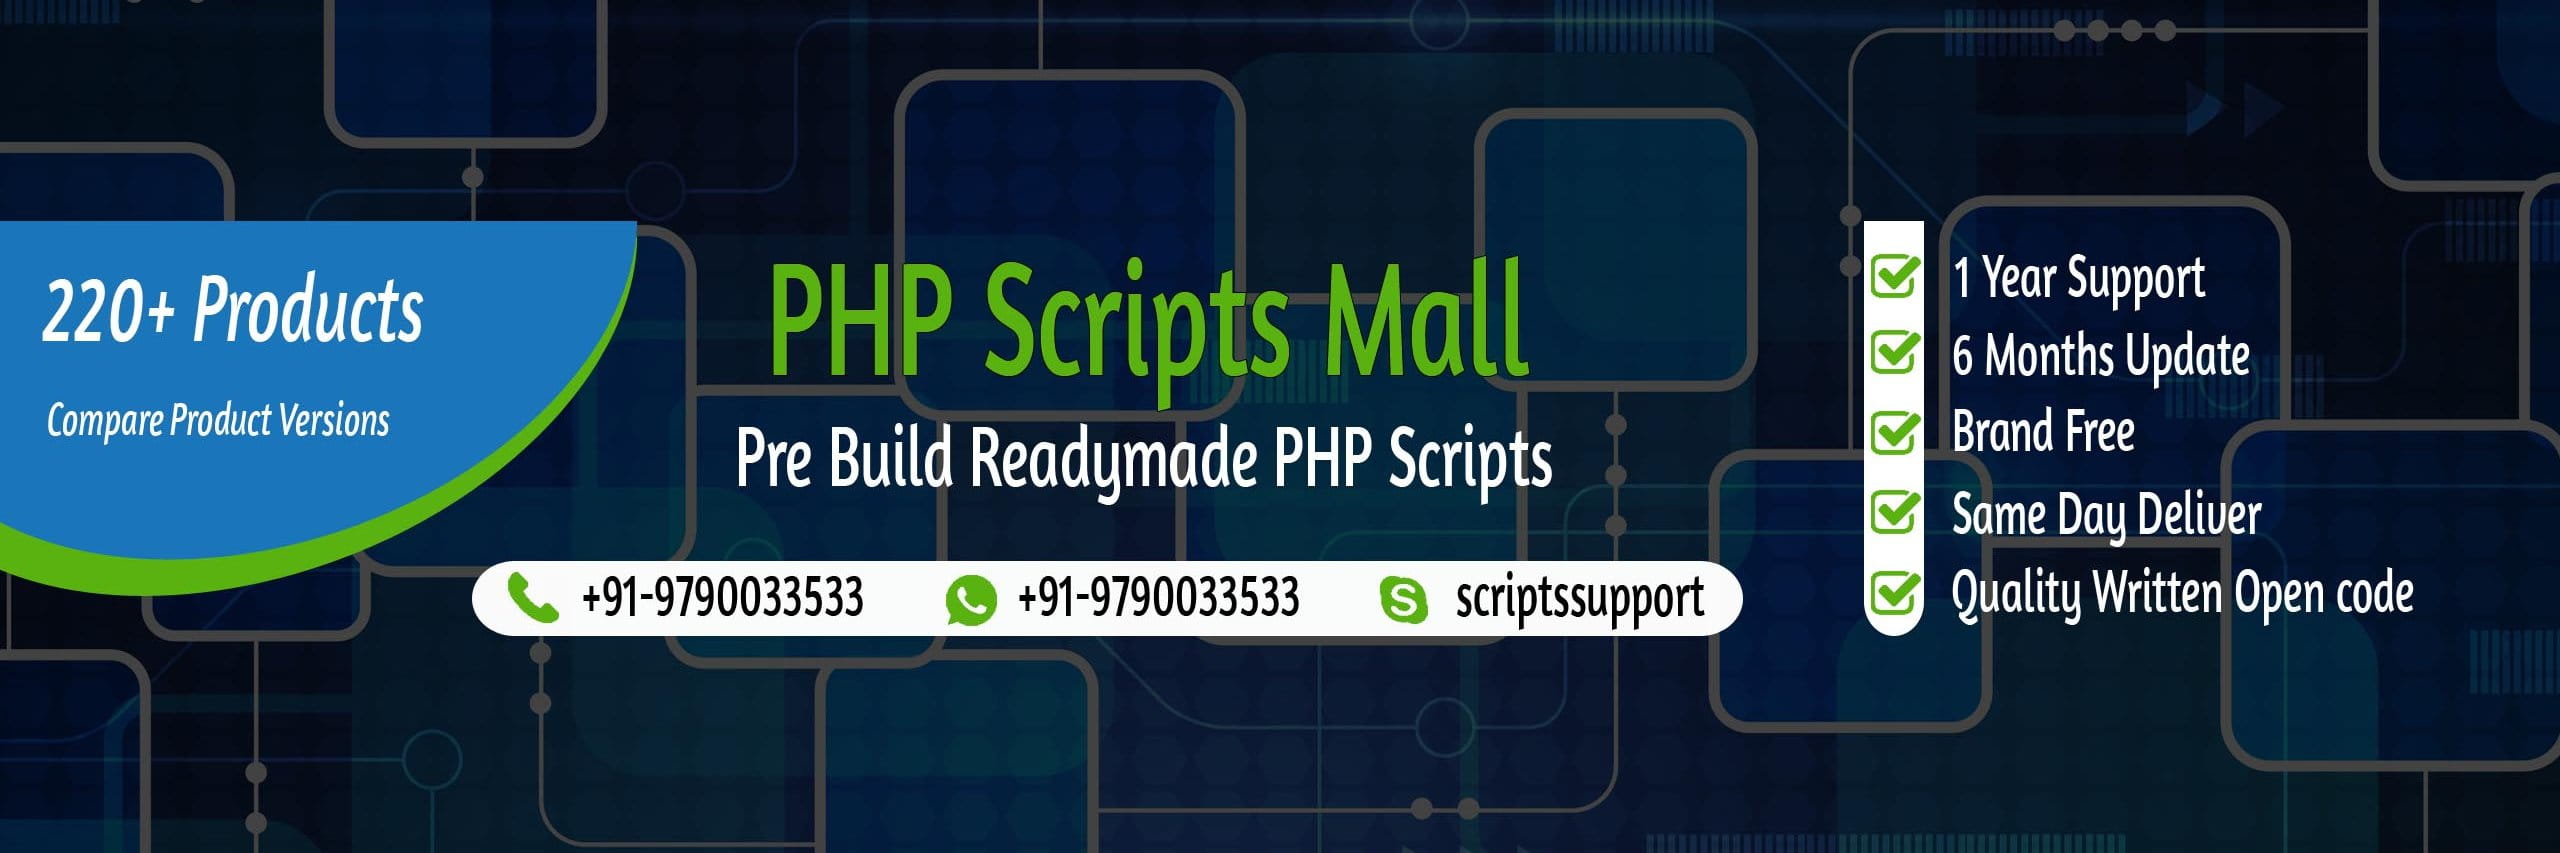 PHP Scripts Mall cover picture